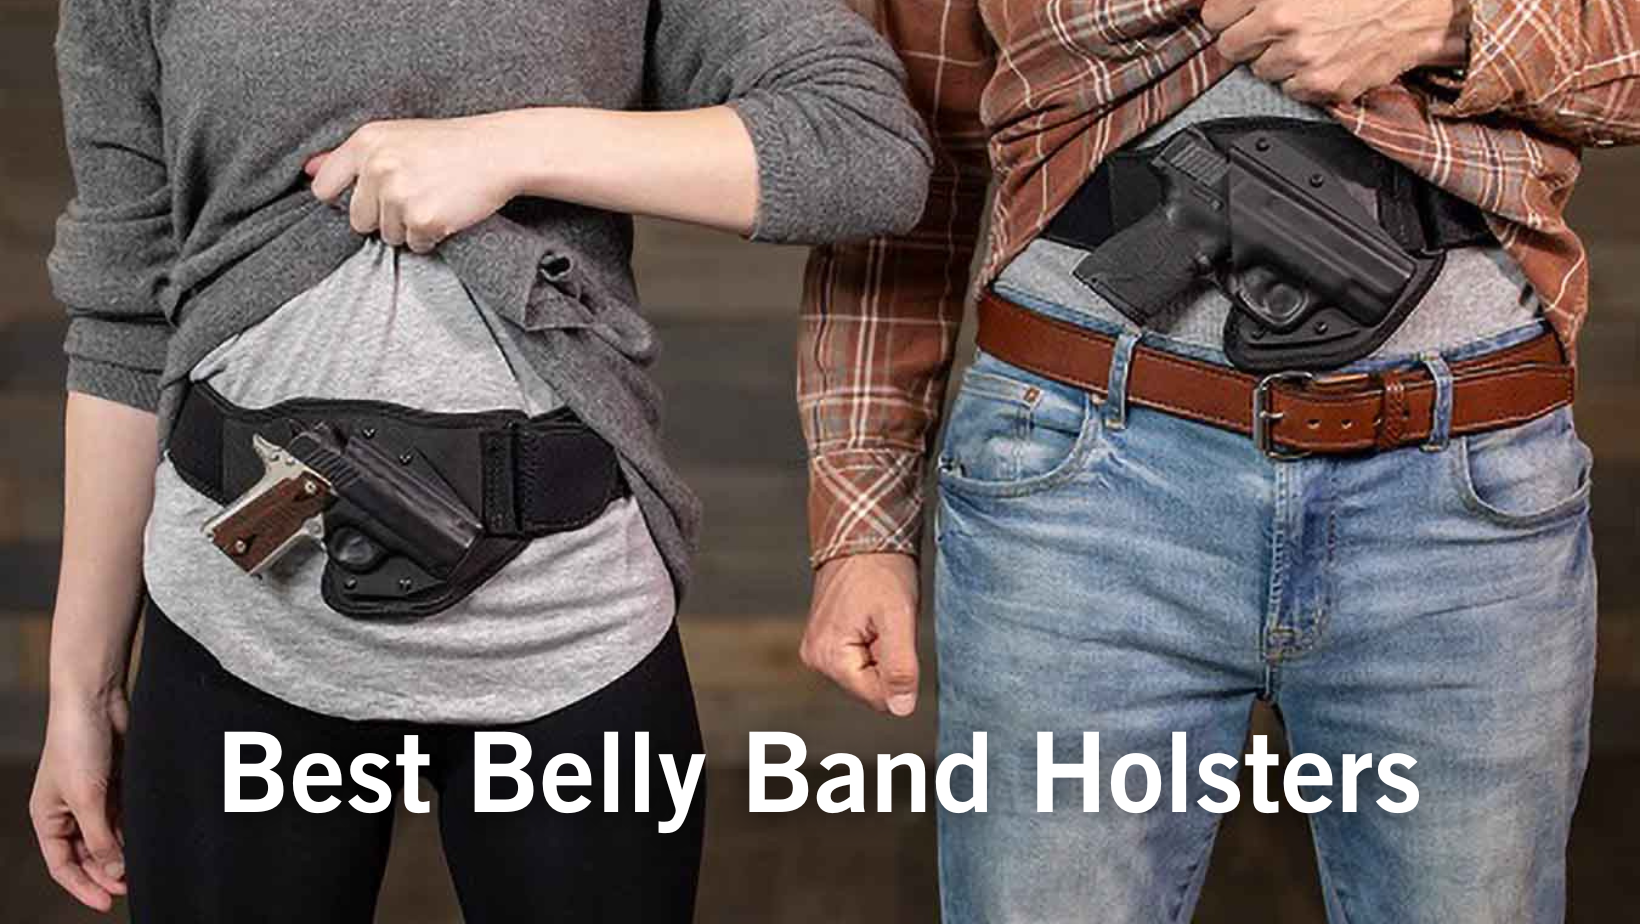 The Ultimate Guide to Female Concealed Carry Options